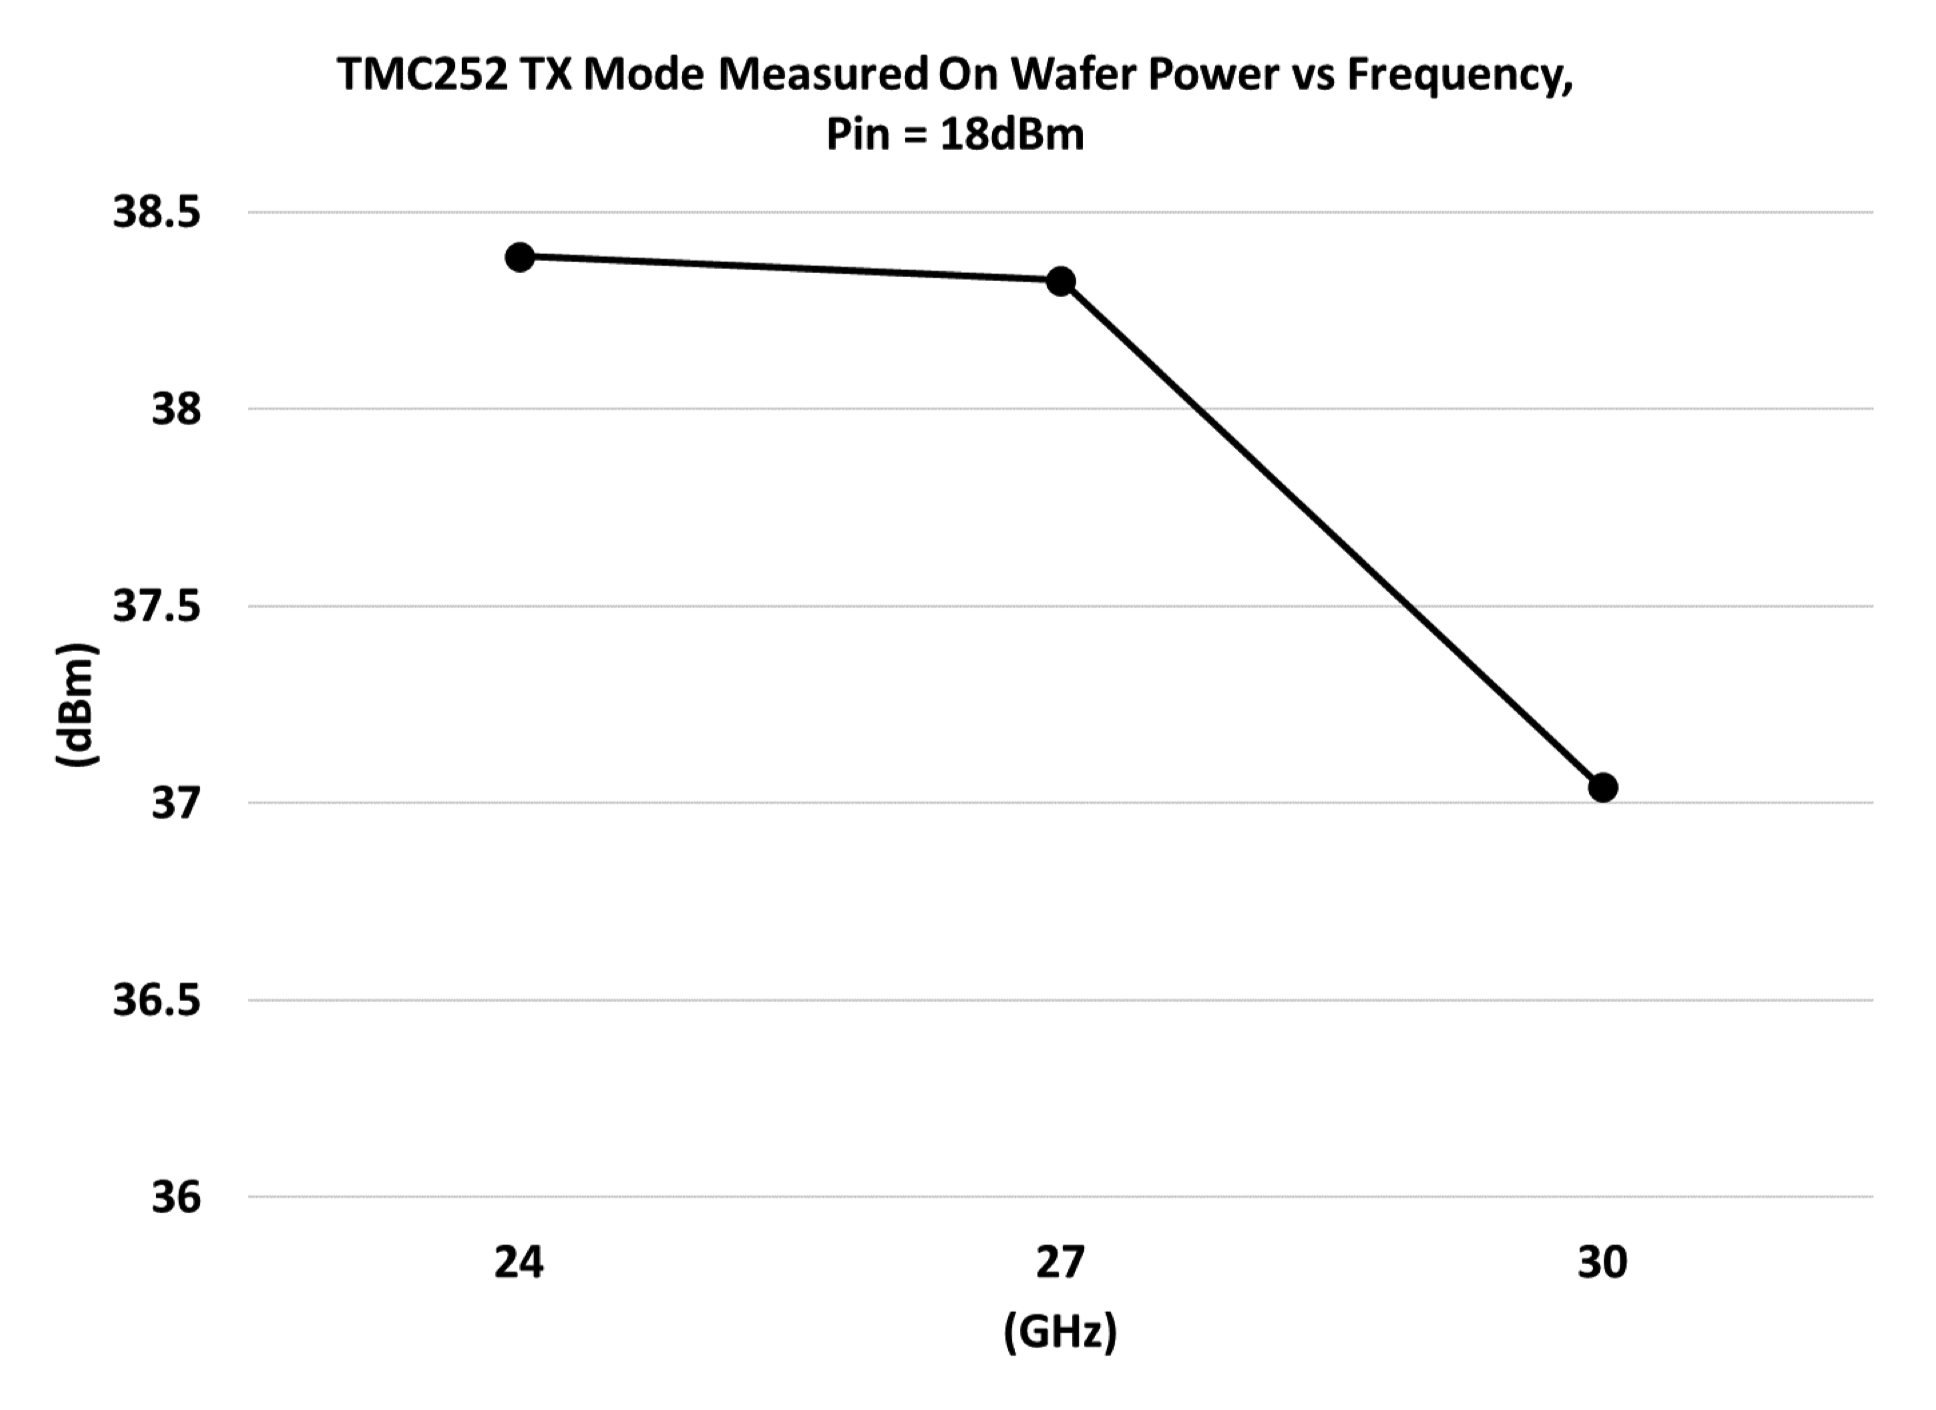 TMC252 measured on-wafer output power with 18 dBm drive at 24, 27, and 30 GHz.